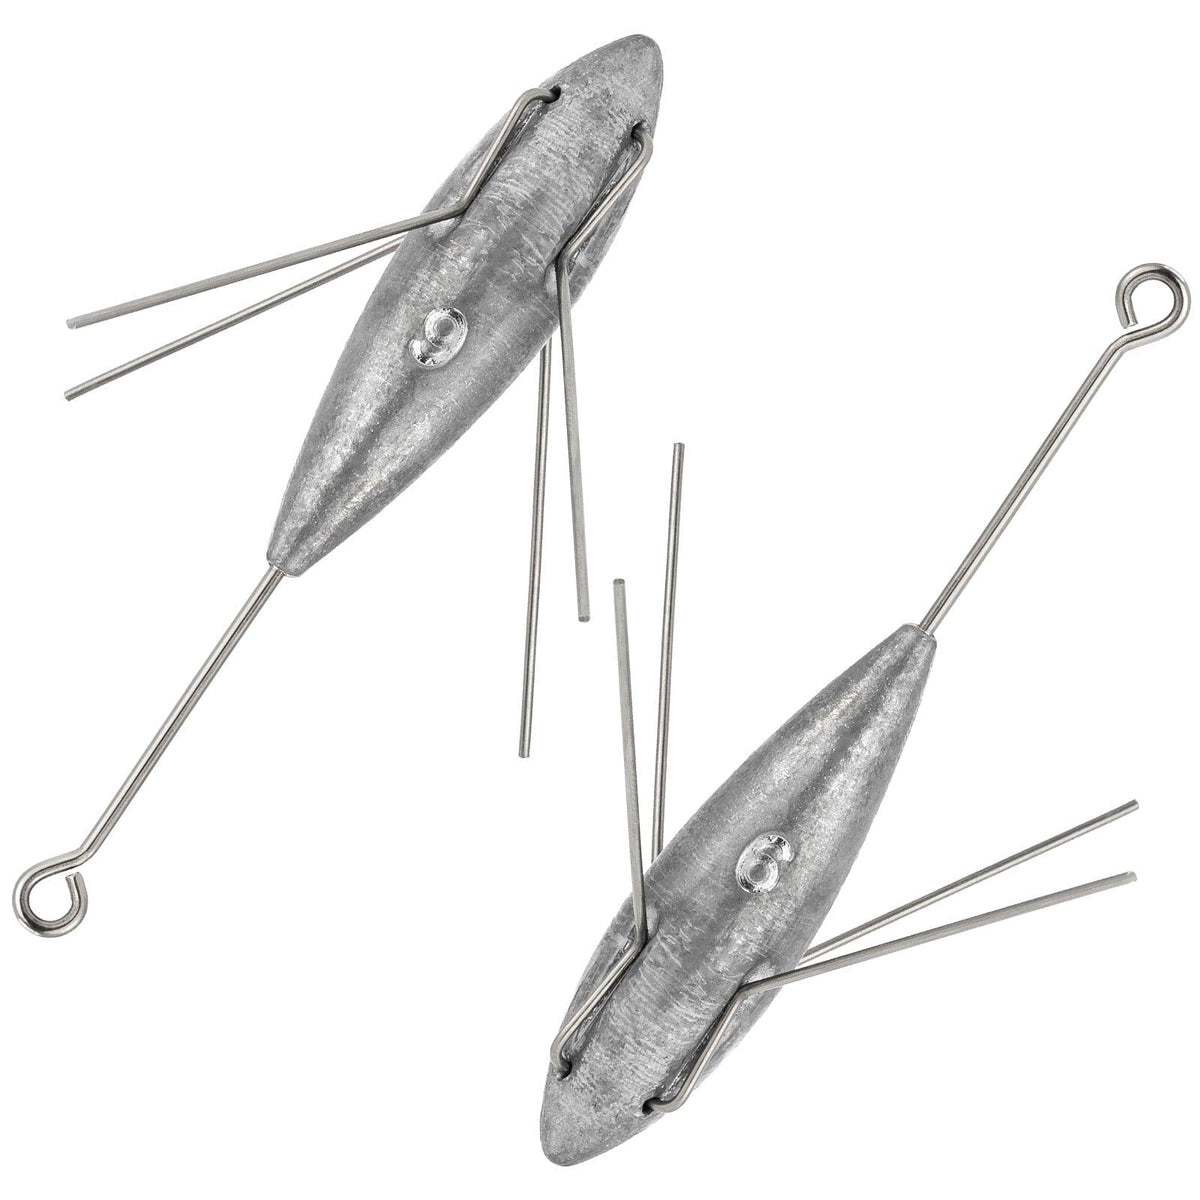 Surf Fishing Spider Weights Sinkers Balance Long Casting 21-130g